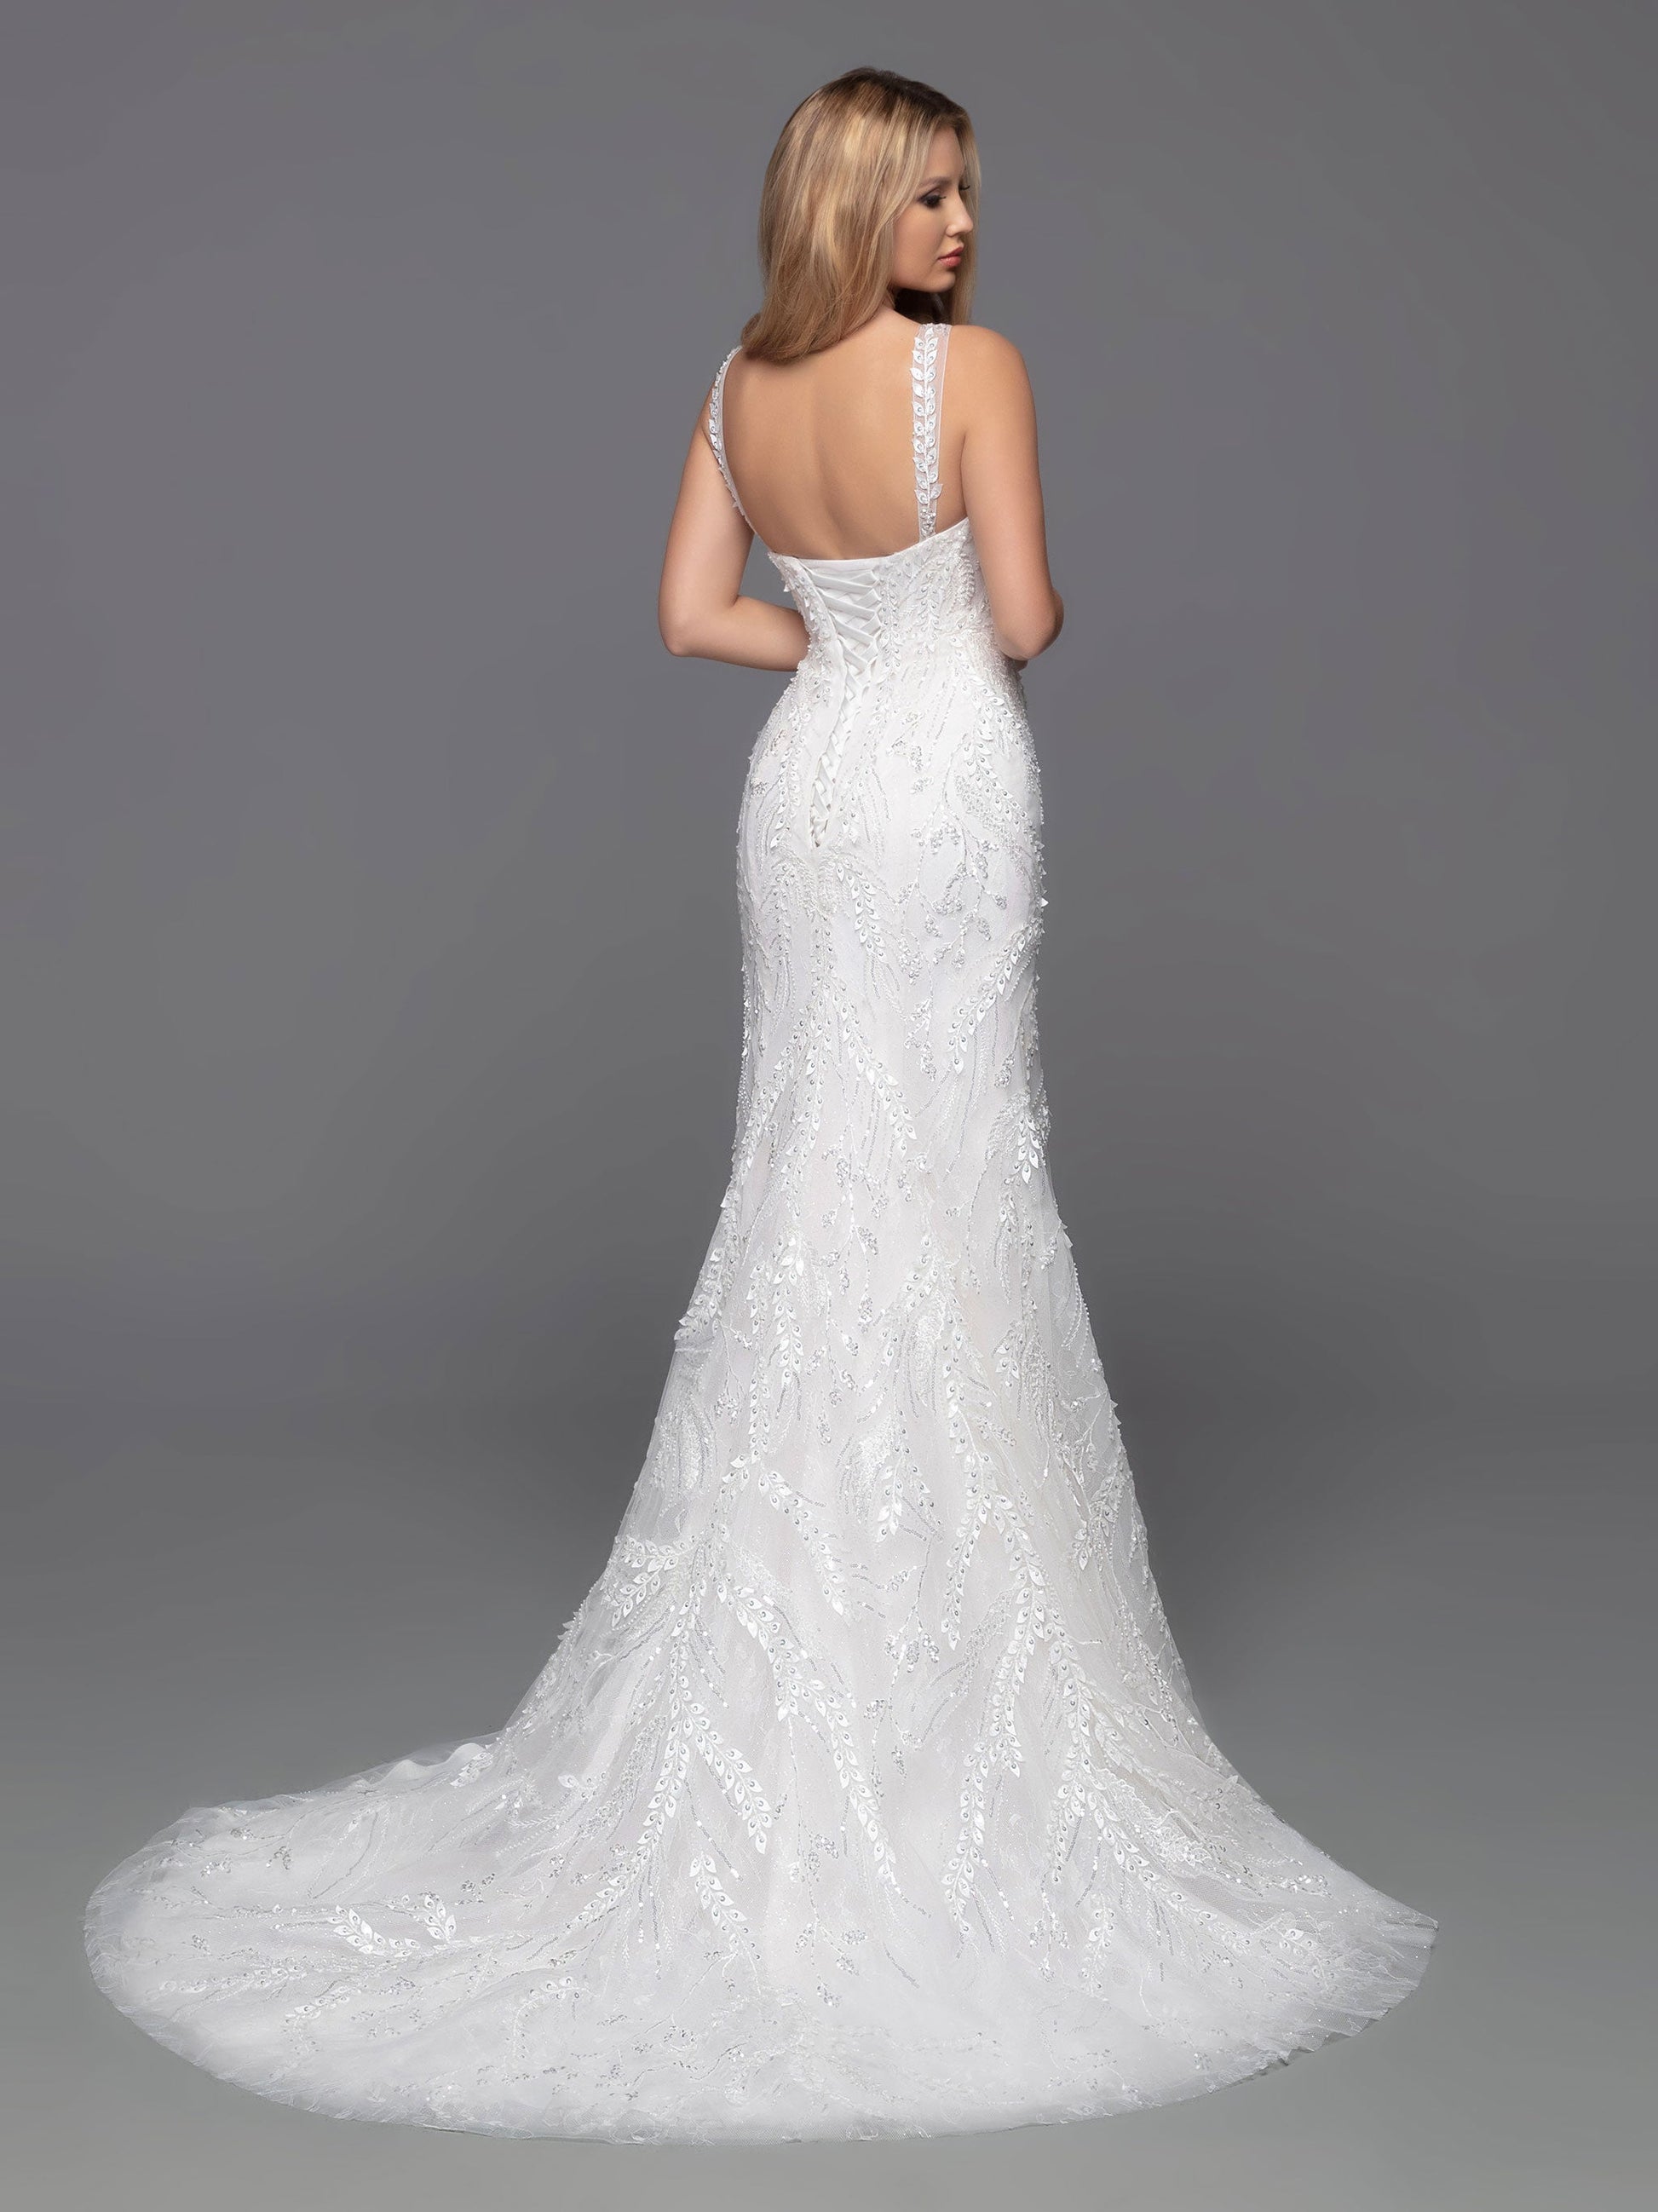 The David Bridal 50805 Draped Beaded Lace Shimmer Fitted Wedding Dress is the essence of elegance. Crafted from intricate beaded tulle and featuring sheer beaded straps and a corset back, this timeless fit and flare sheath exudes classic sophistication.  Sizes: 2-20  Colors: Ivory/Blush, Ivory/Ivory